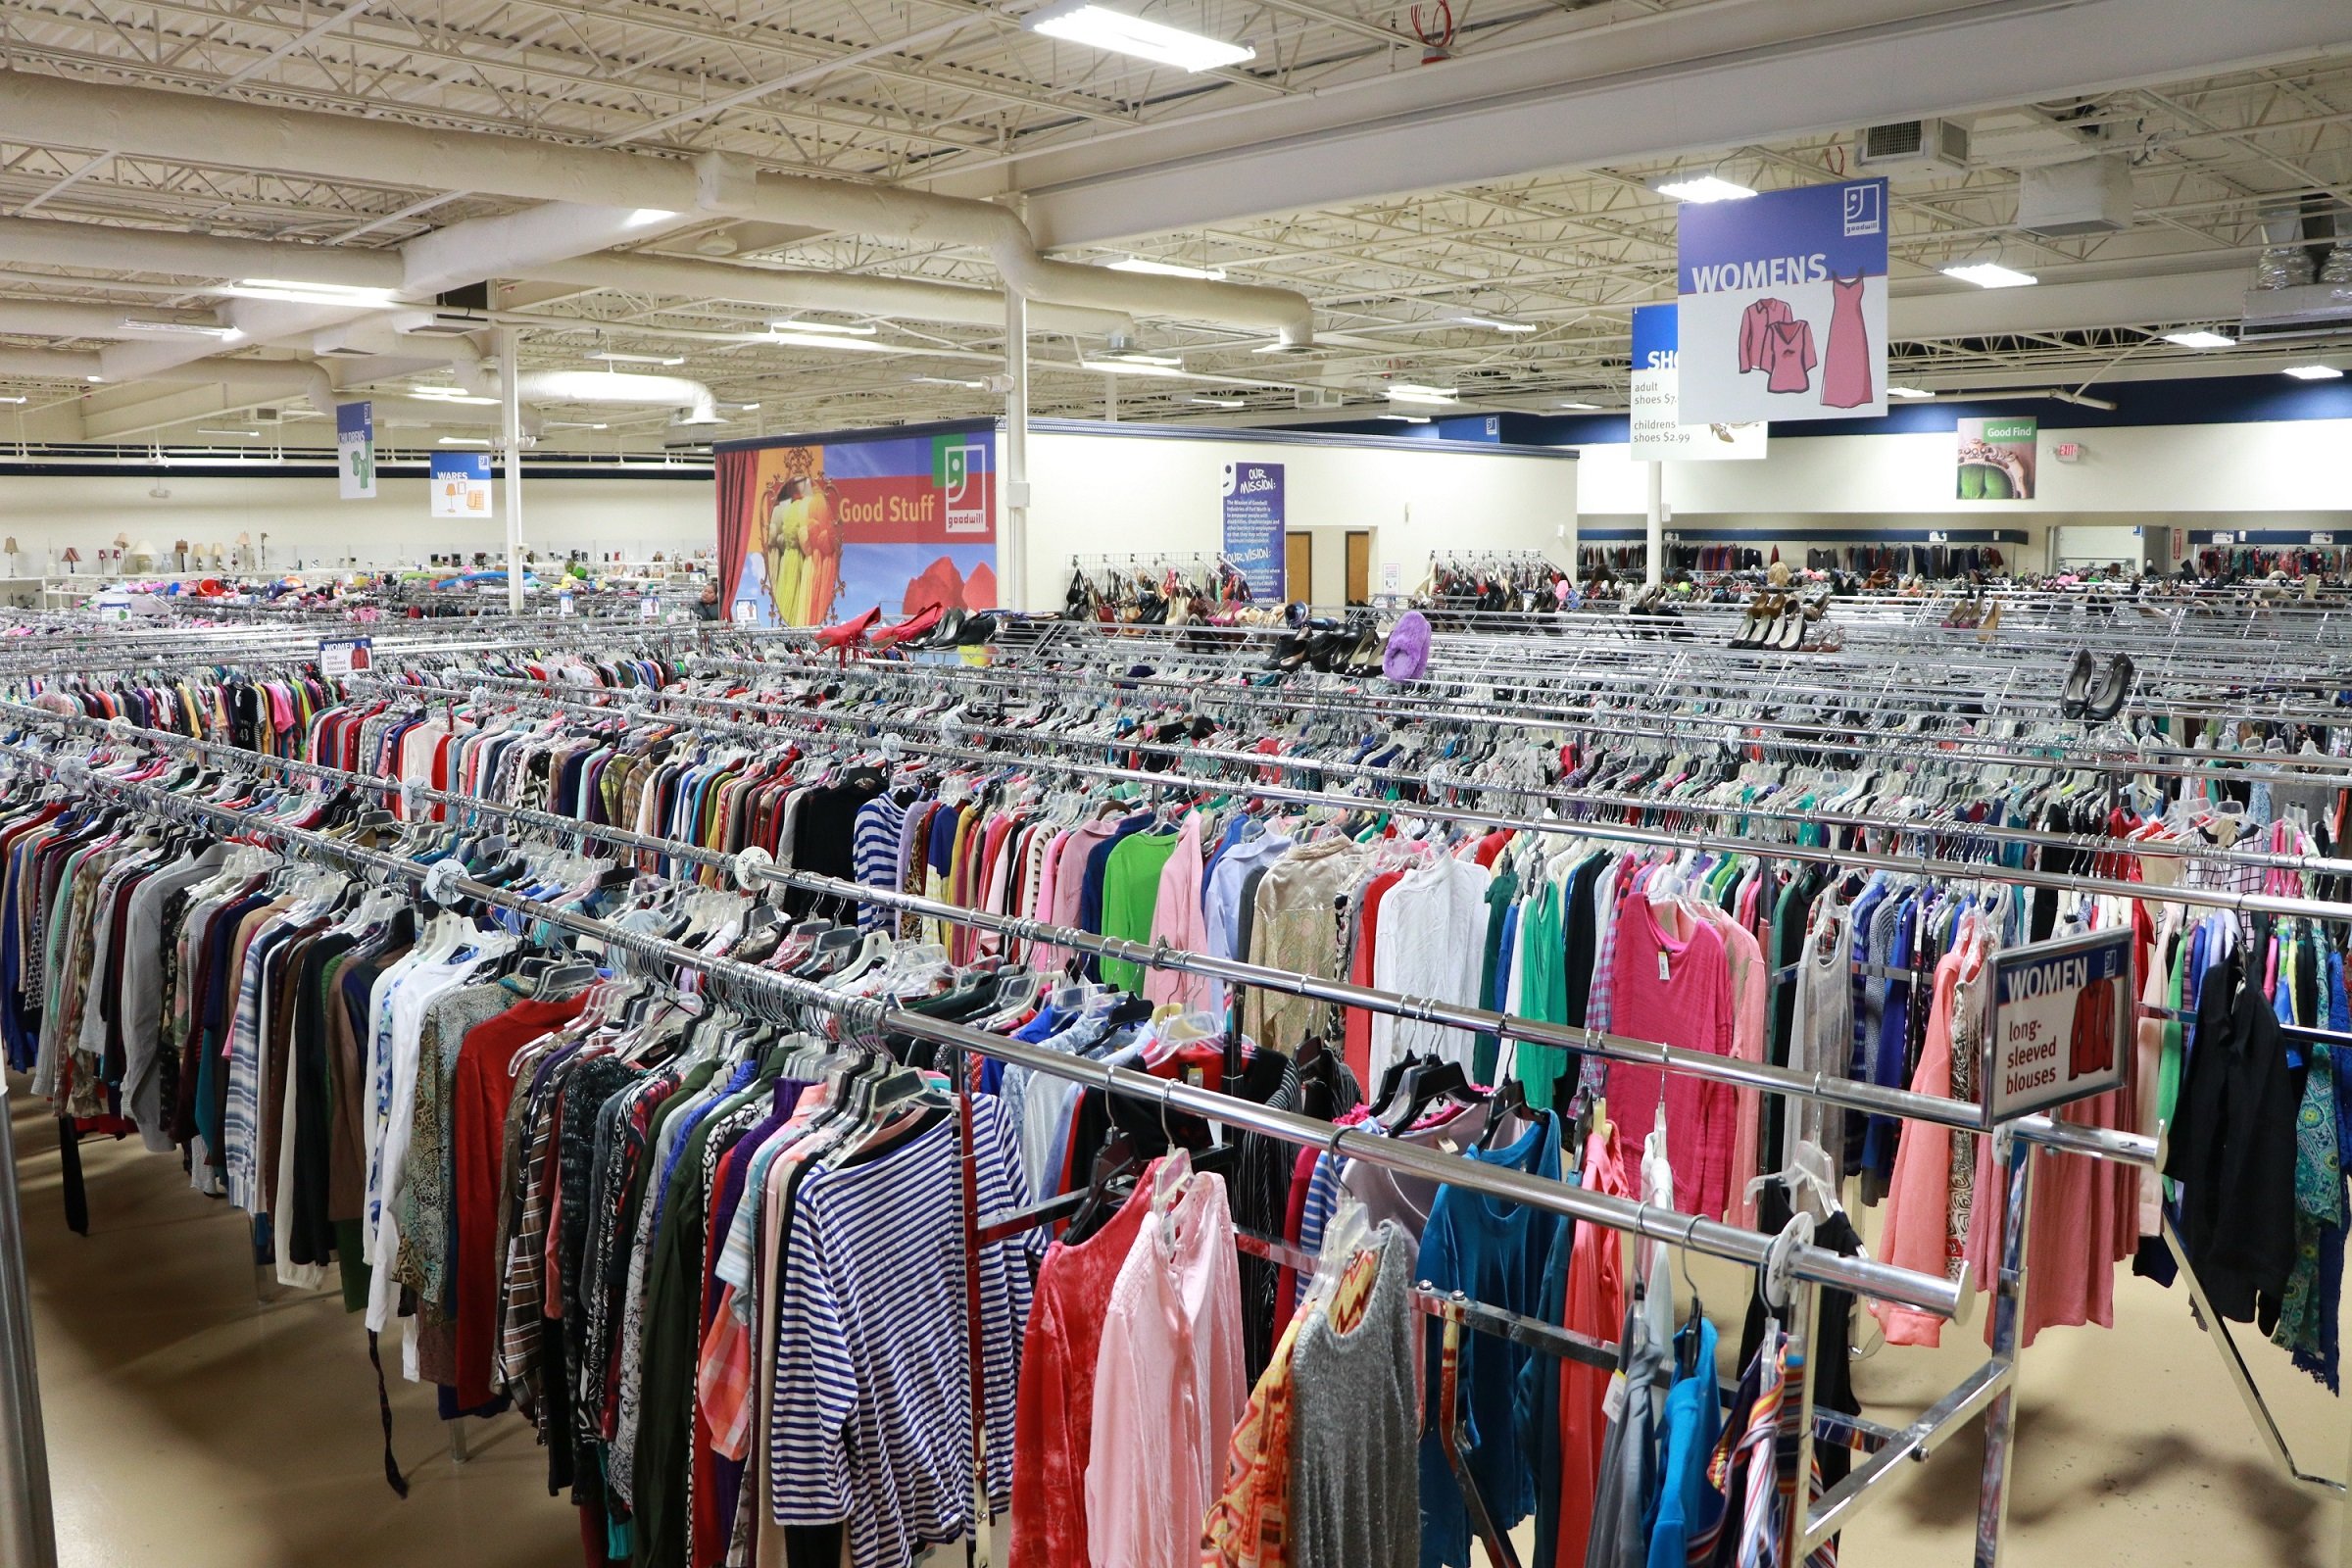 Interior of San Diego Thirft Store with racks of clothing